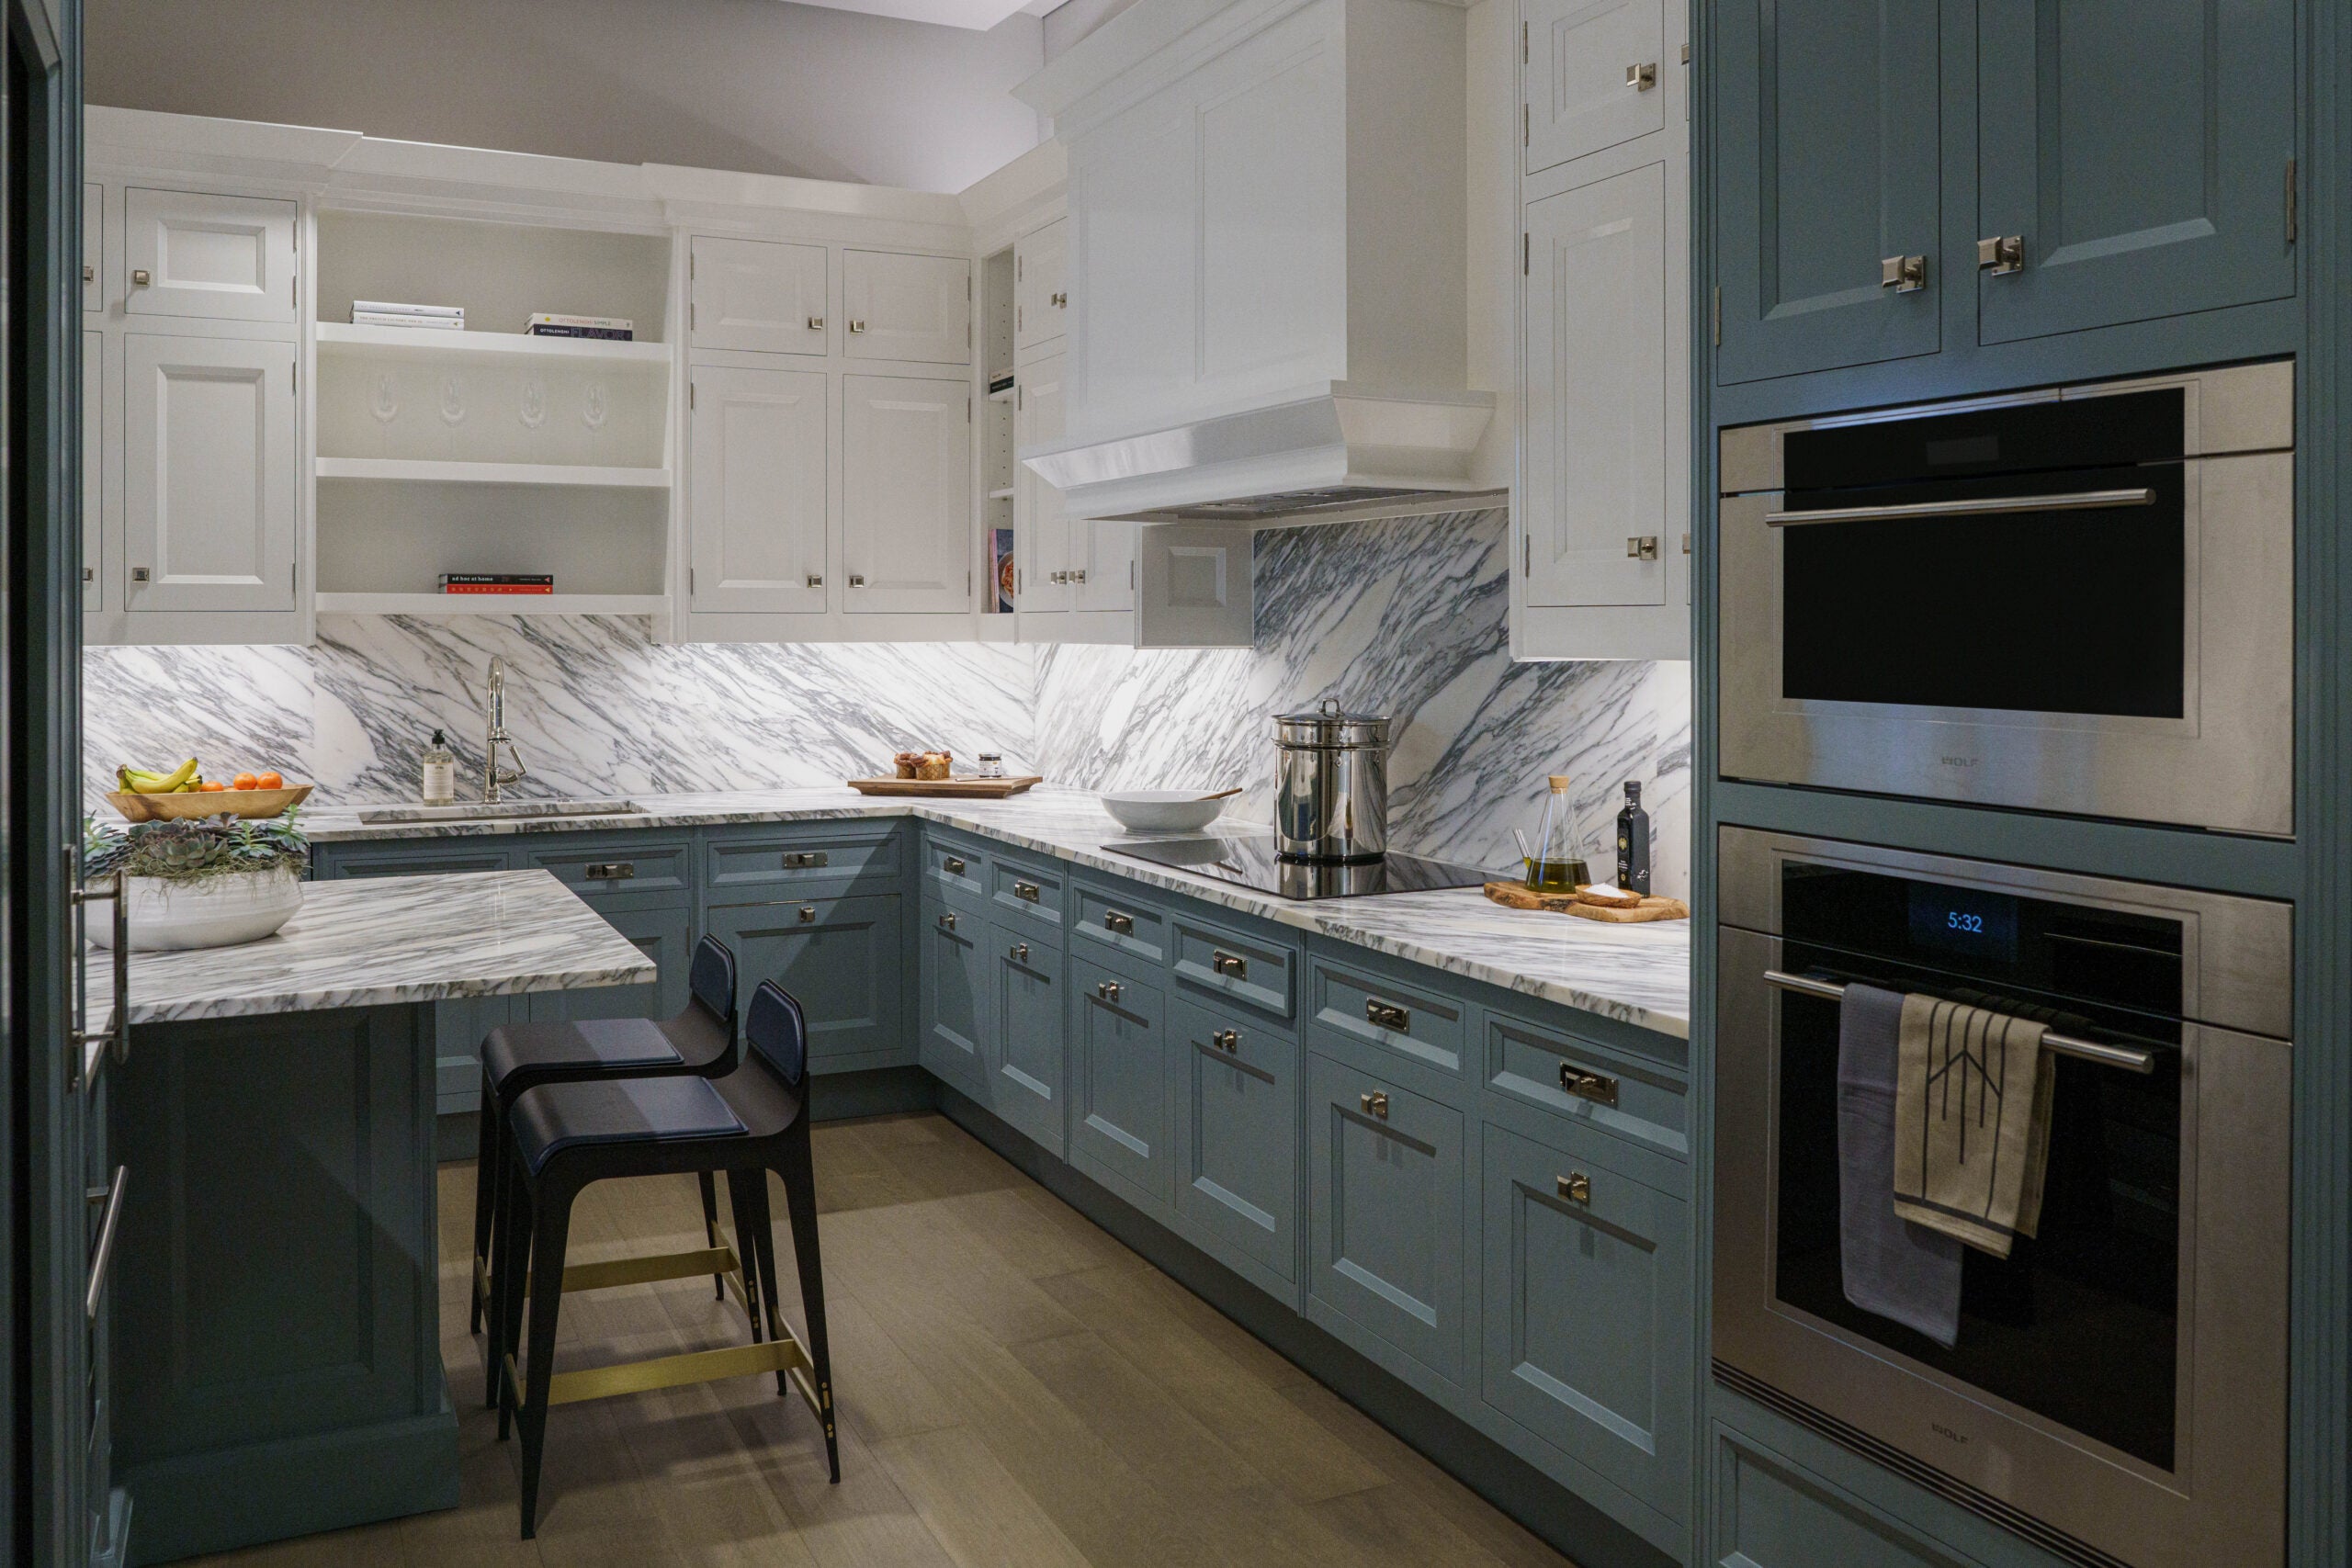 A kitchen with cabinets that are white and a blueish-green.